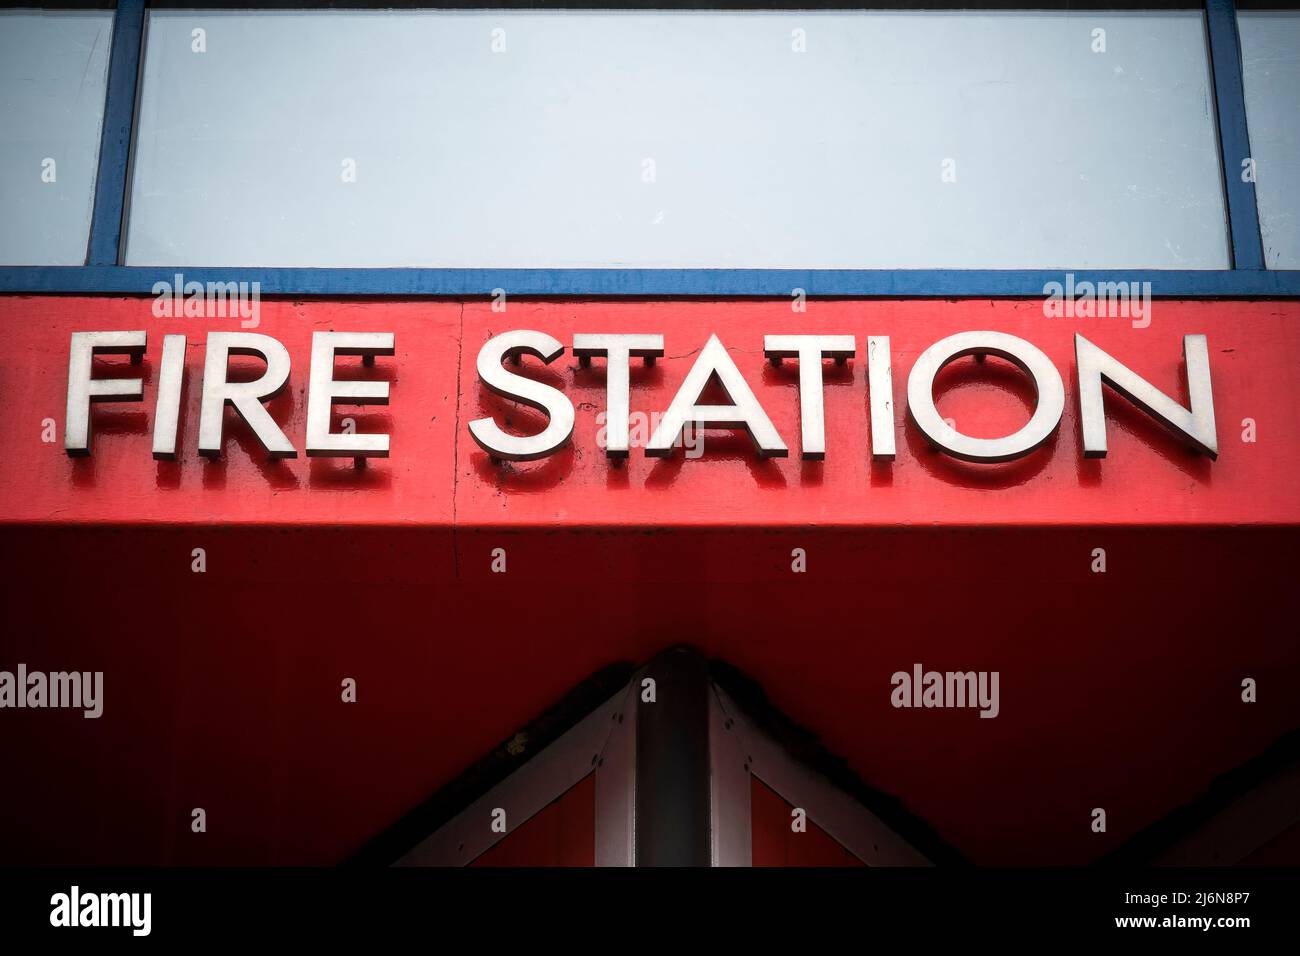 Fire station metal sign against bright red background Stock Photo